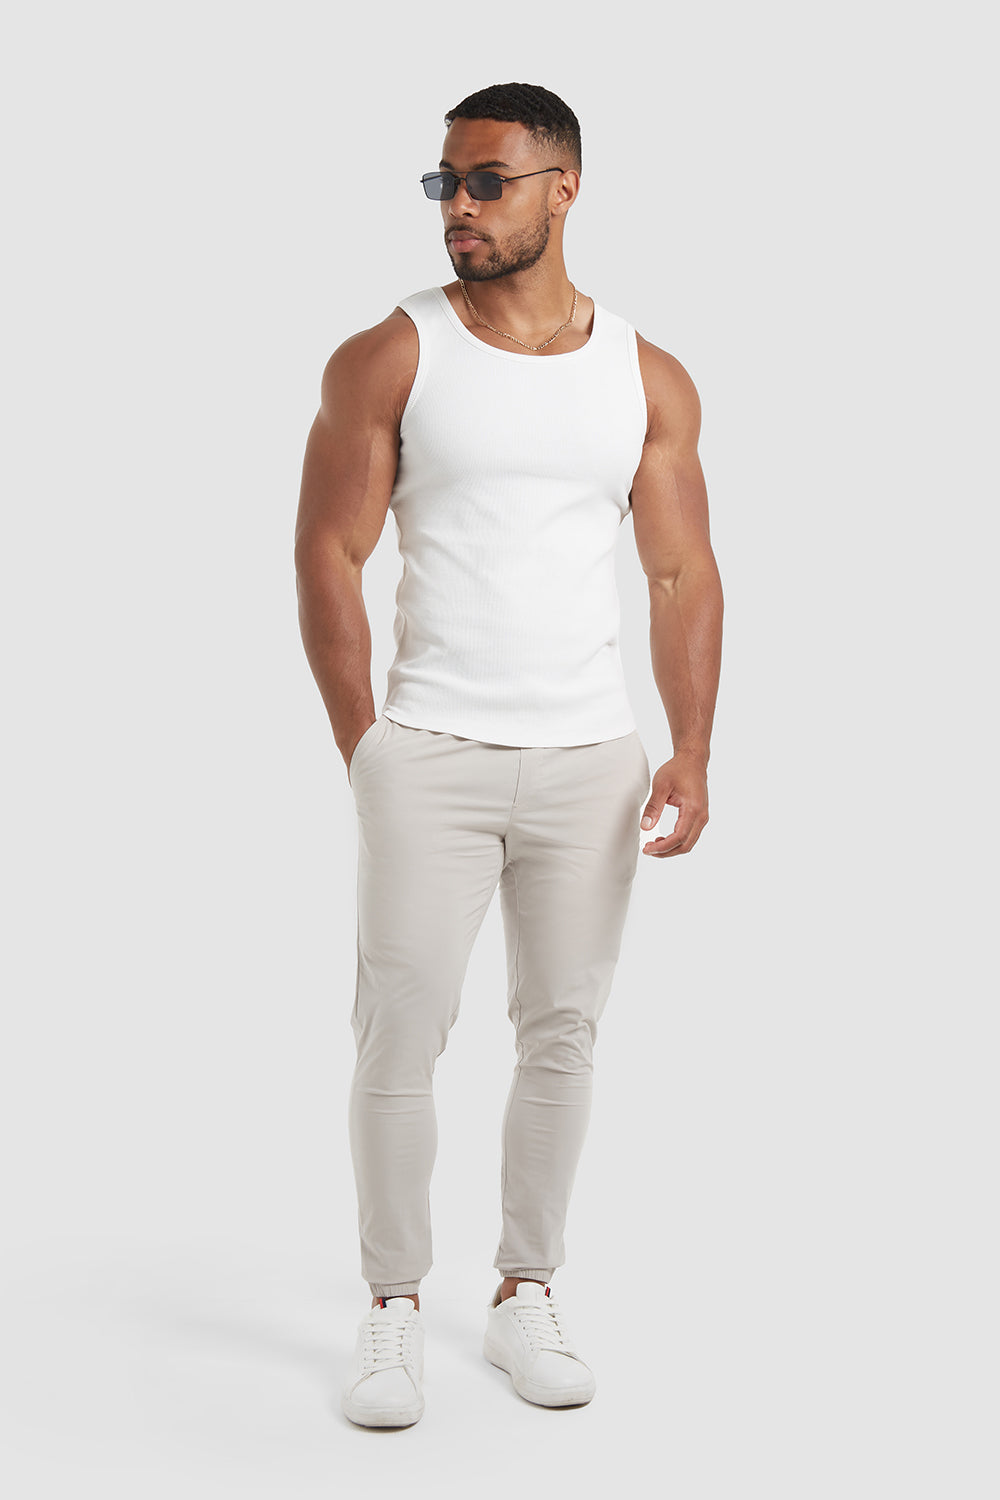 Ribbed Vest in White - TAILORED ATHLETE - ROW